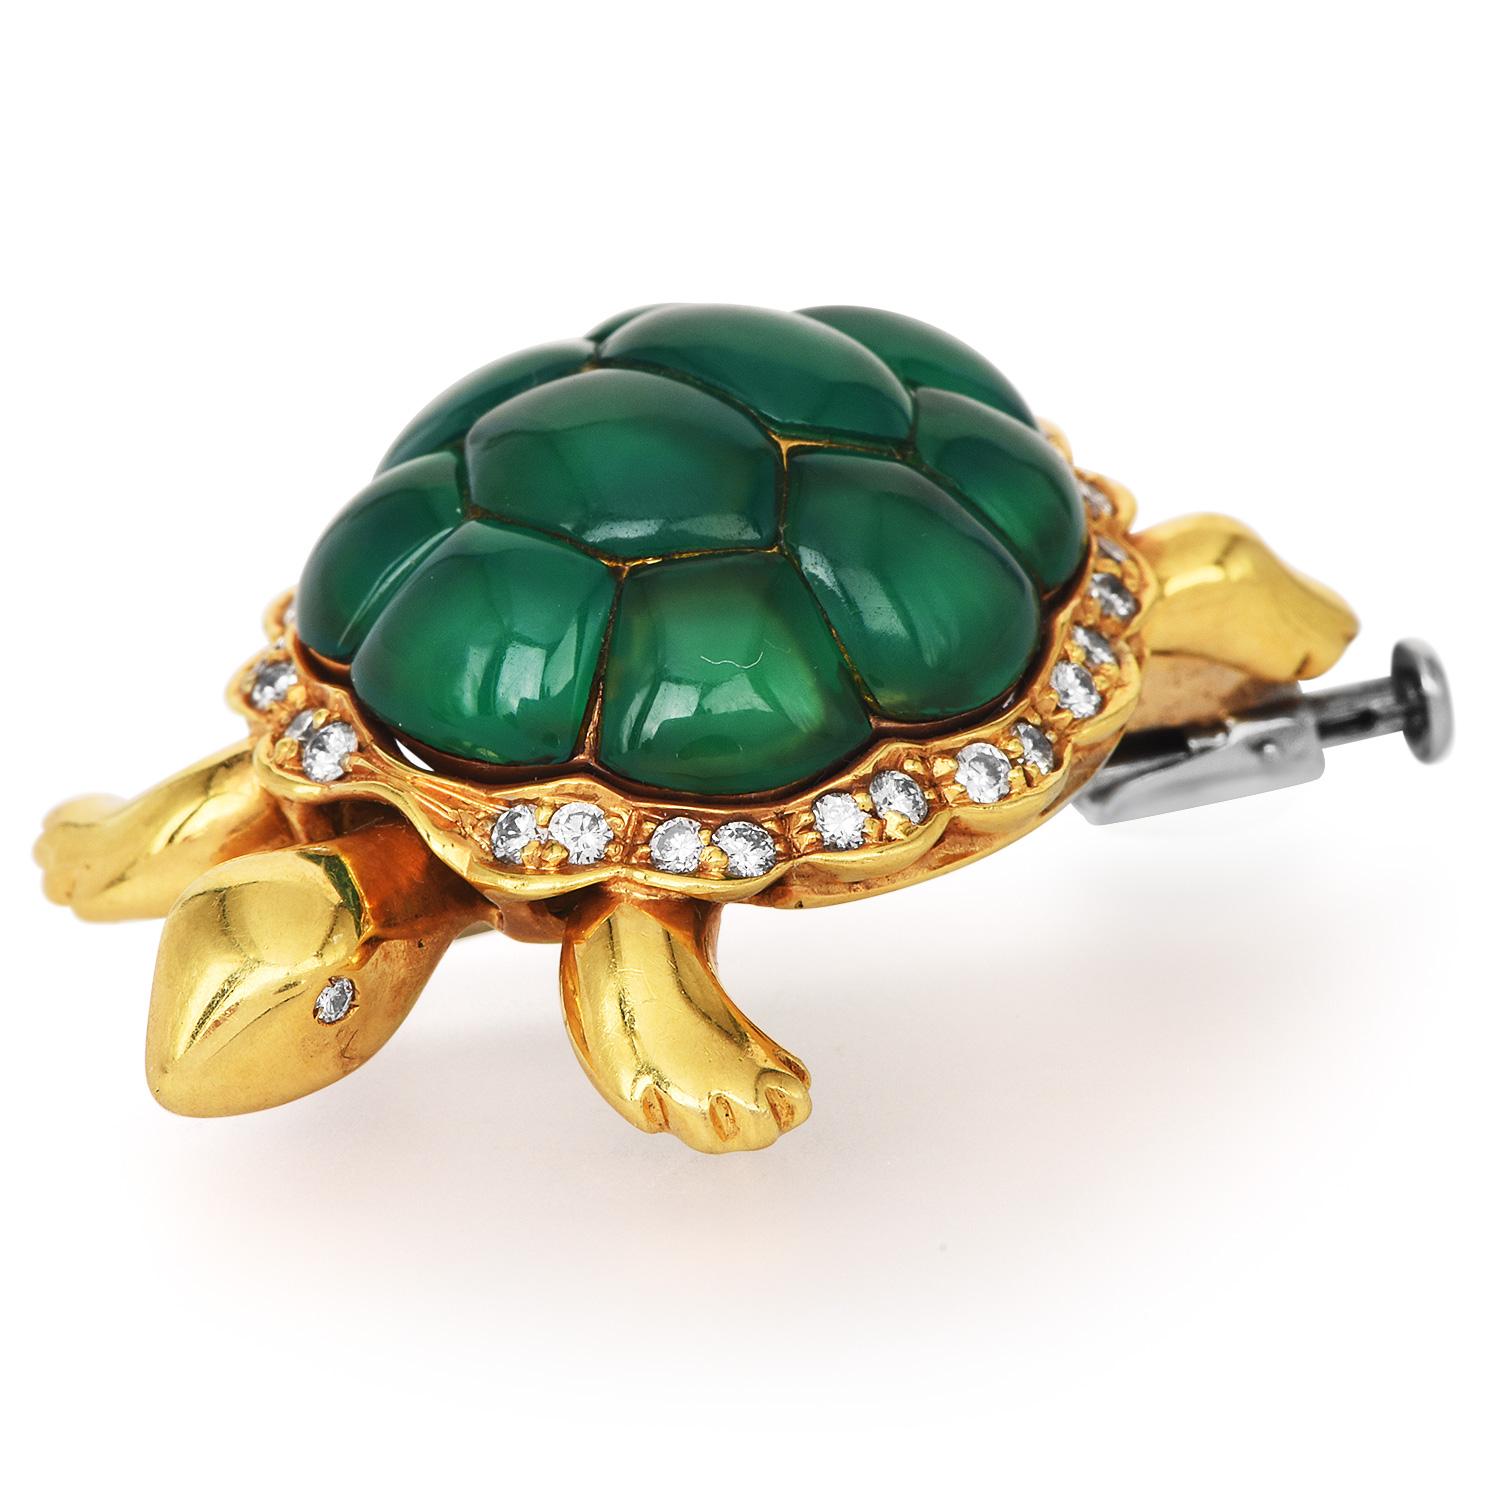 For all the collectors, this is a must-have piece.

This adorable vintage turtle pin brooch is crafted in 18K yellow gold.

Weighing 15.0 grams and measuring 1.5